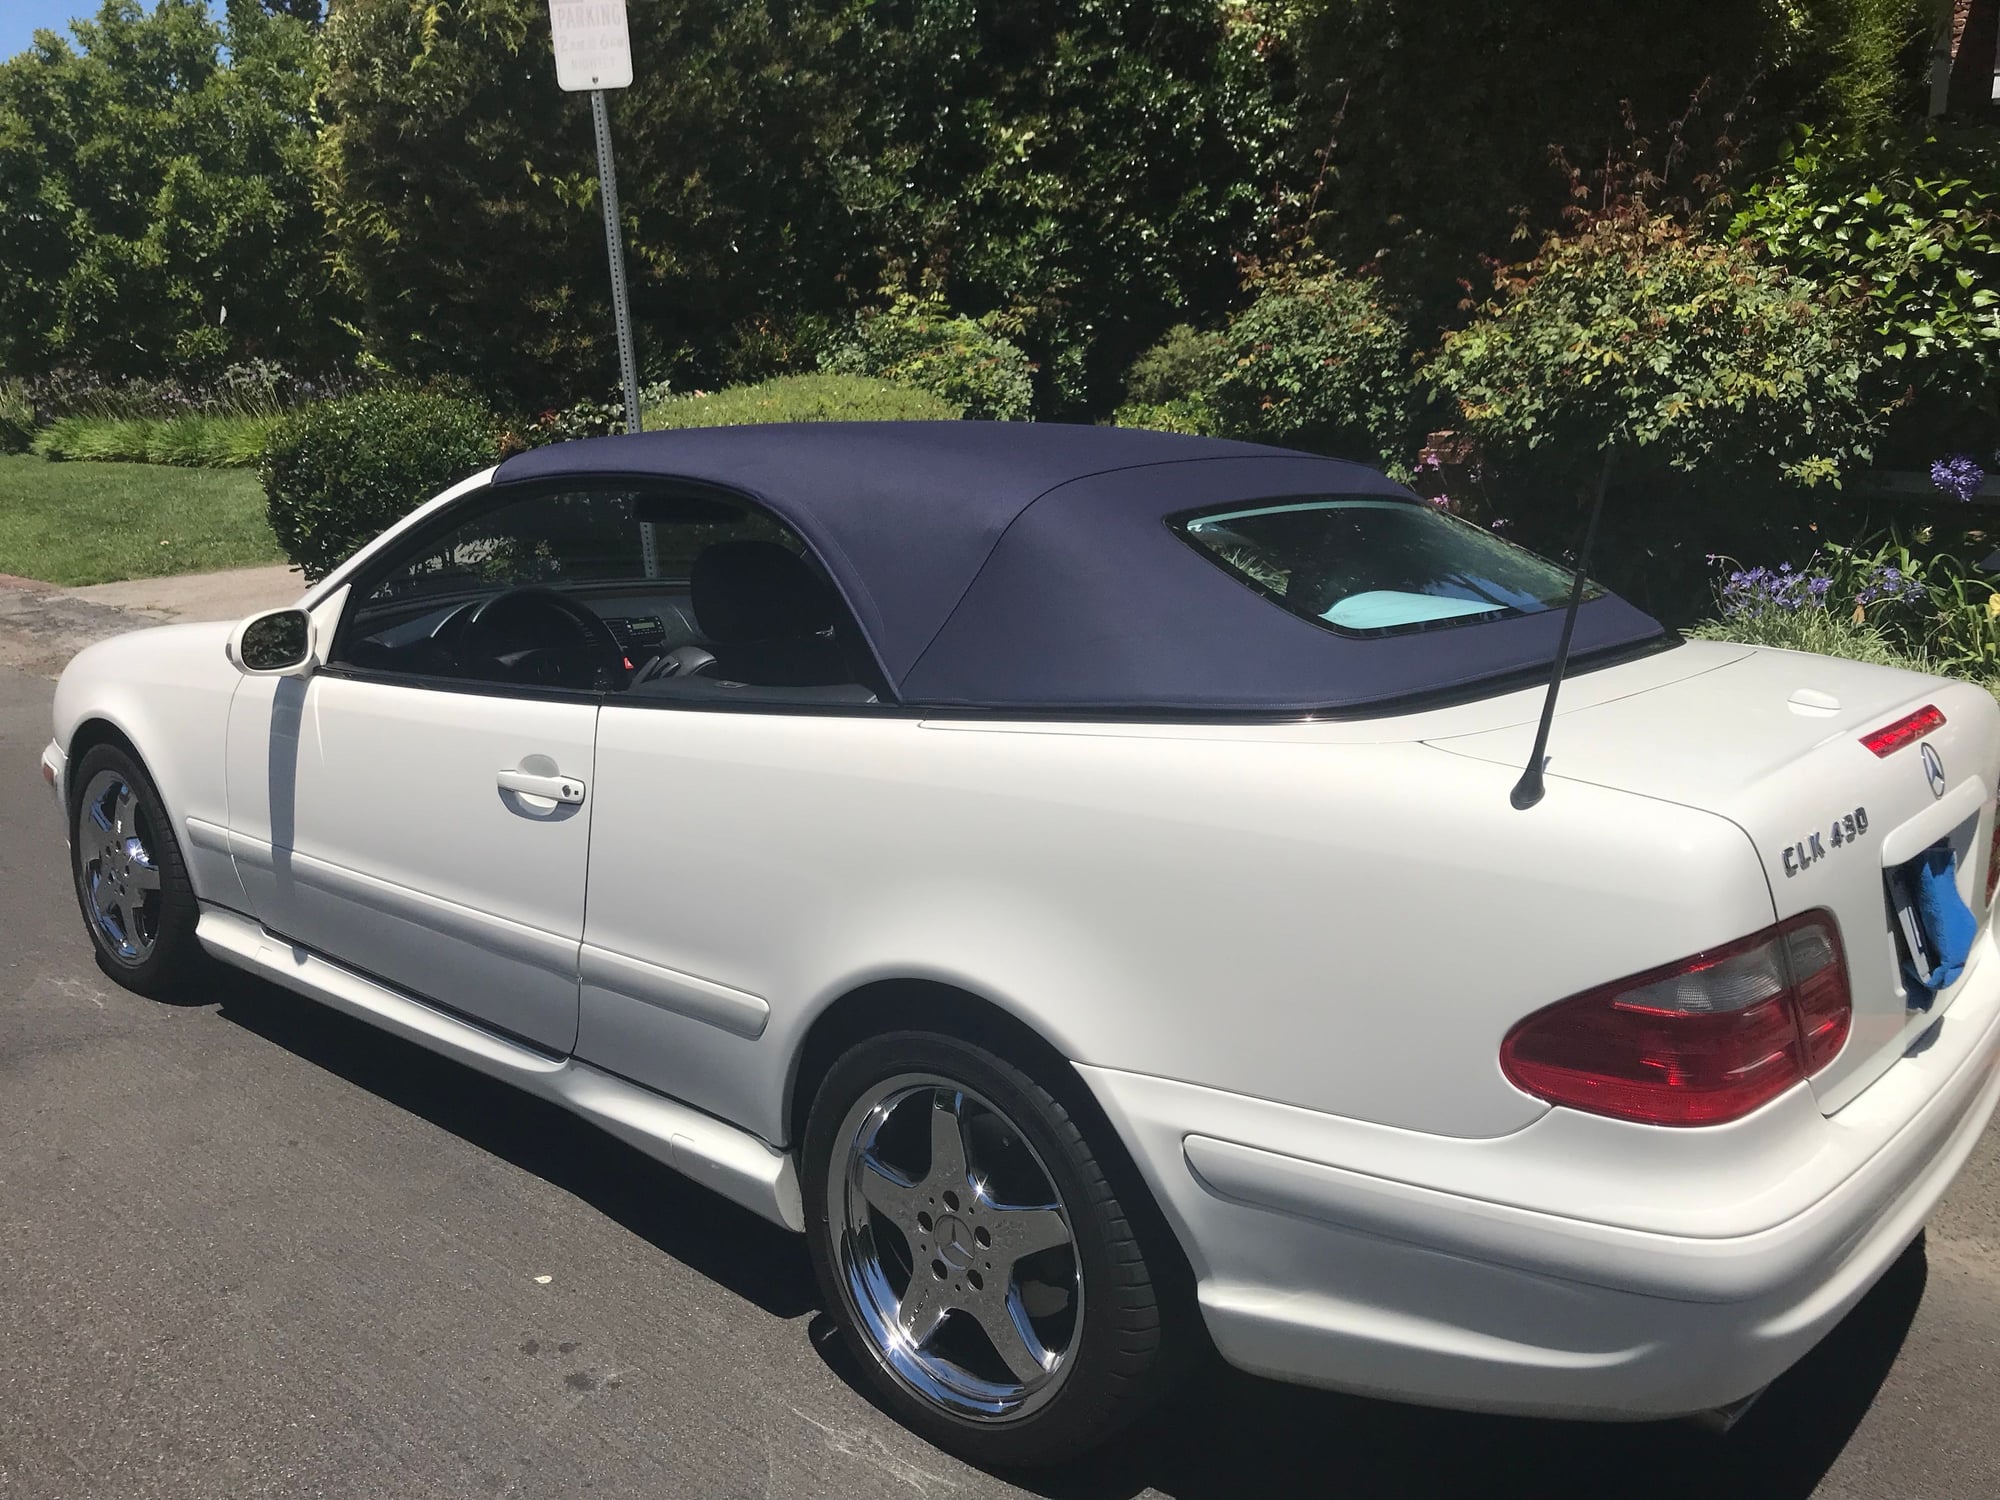 2002 Mercedes-Benz CLK430 - 2002 Mercedes CLK430 Excellent condition 71K miles original paint/top etc - Used - VIN WDBLK70G12T12215 - 71,461 Miles - 8 cyl - 2WD - Automatic - Convertible - White - Toluca Lake, CA 91602, United States